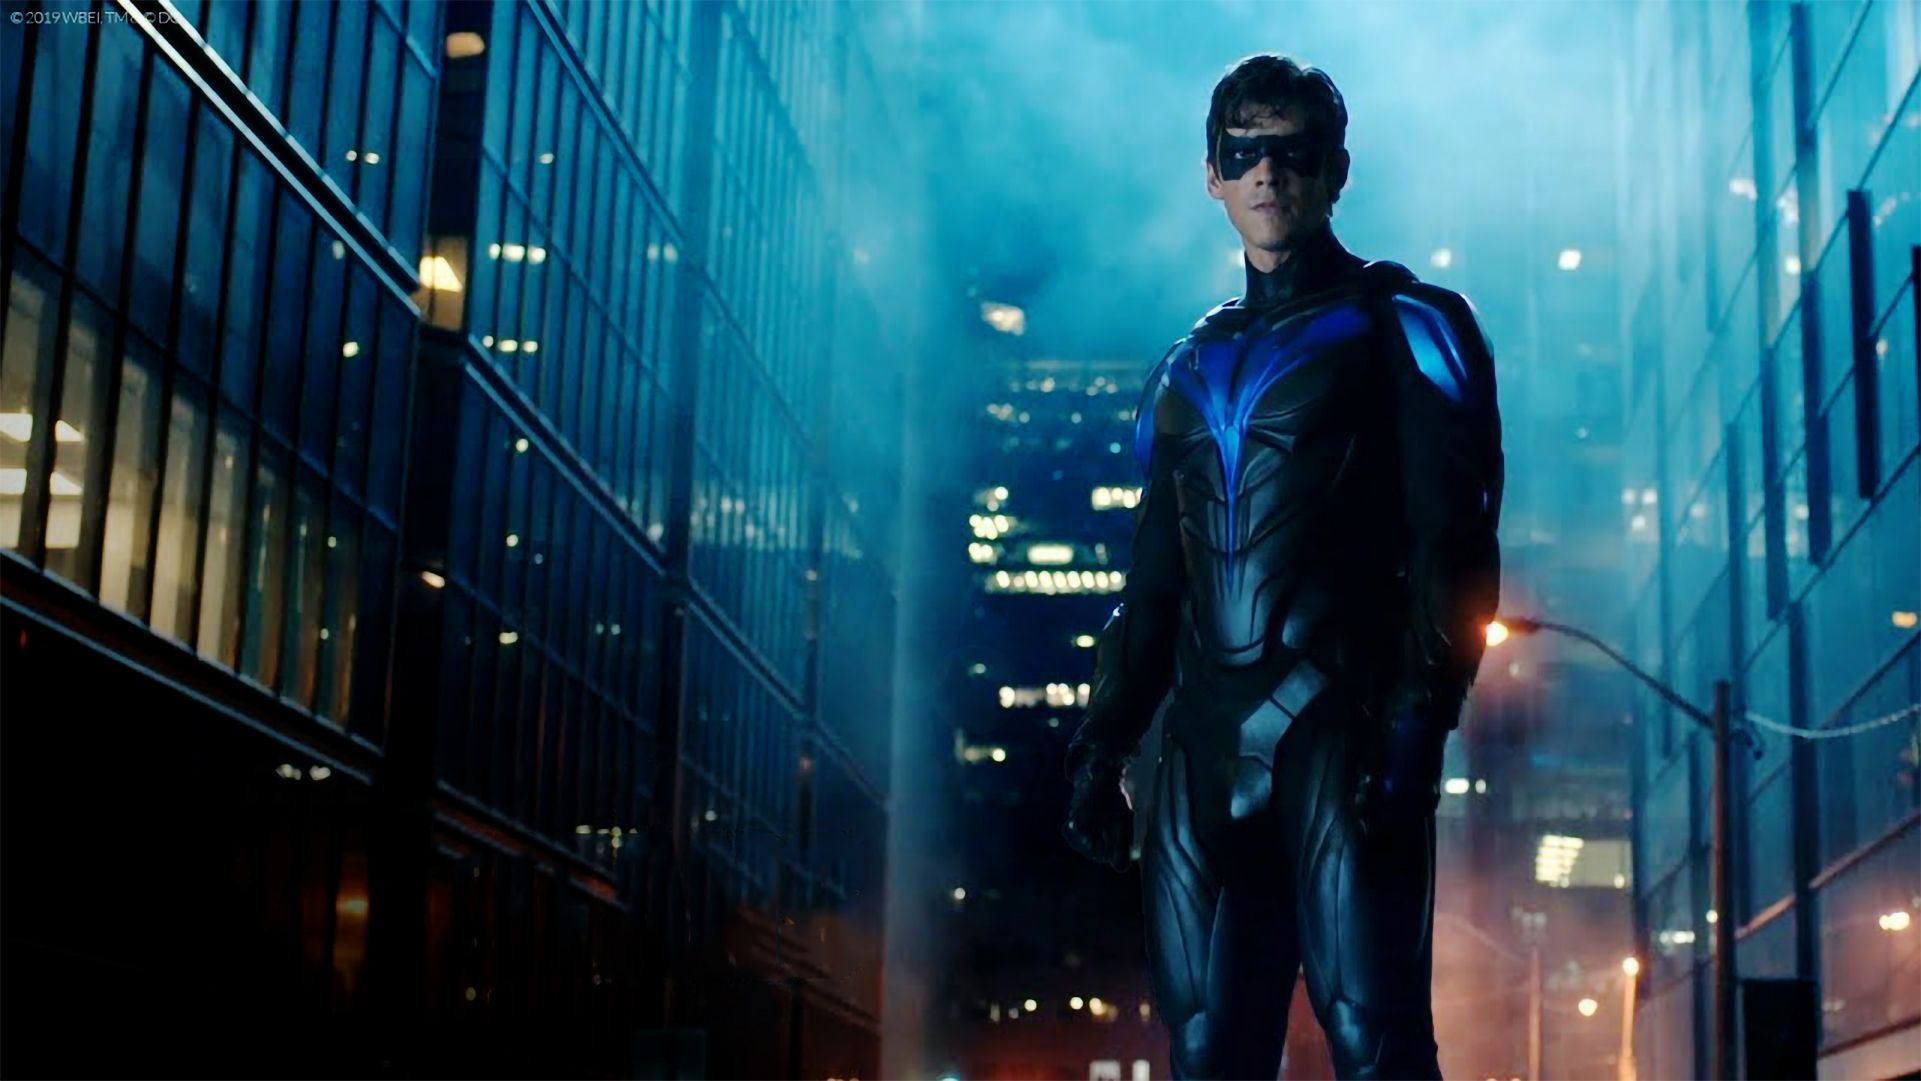 Dick Grayson as Nightwing In Titans Wallpaper, HD TV Series 4K Wallpaper, Image, Photo and Background